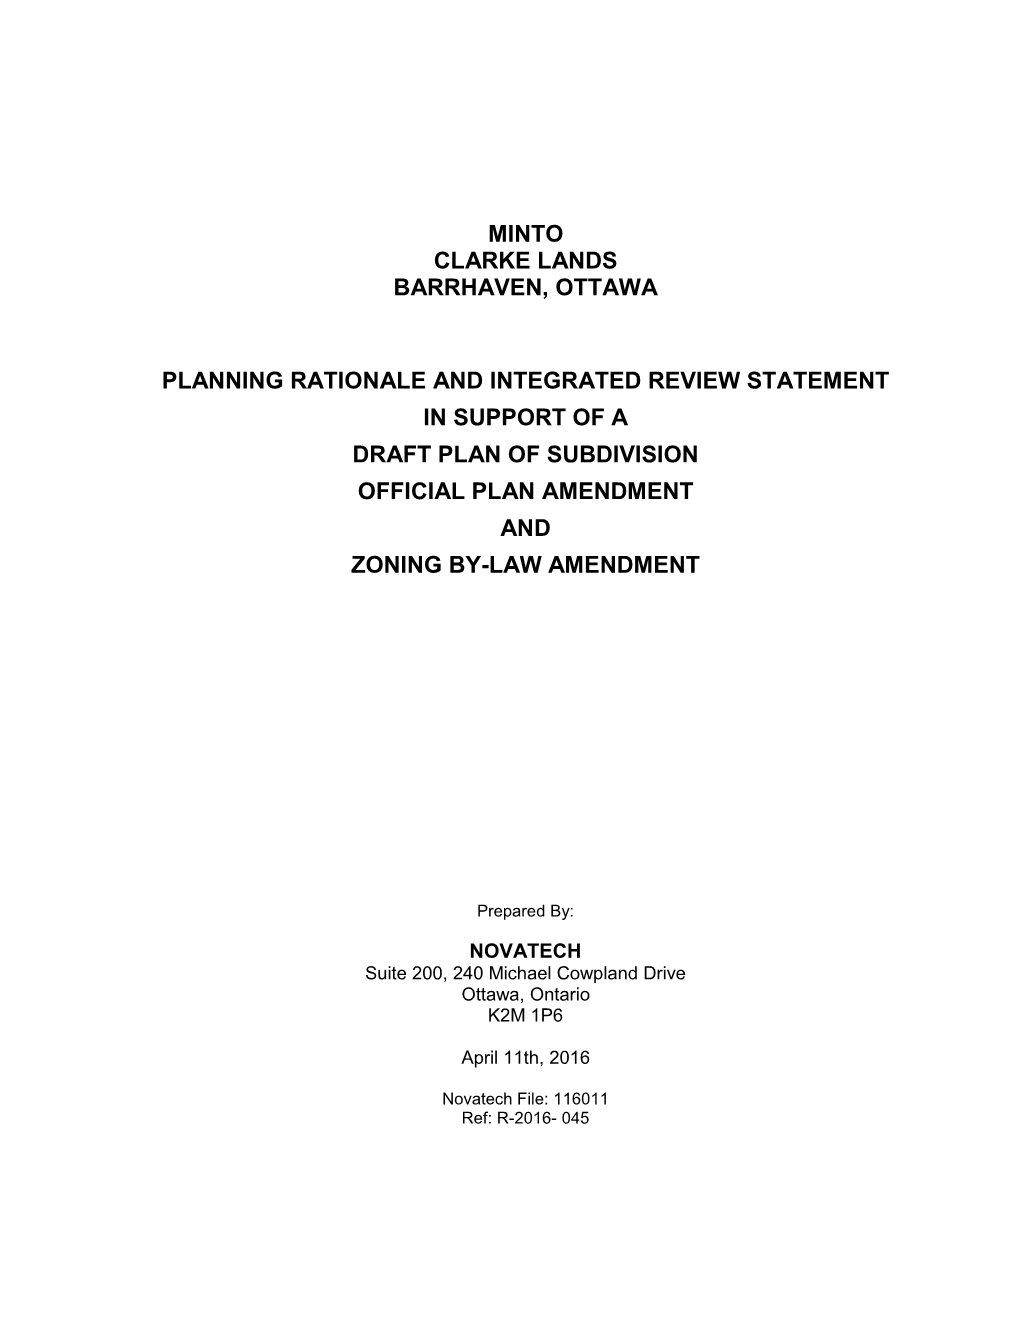 Planning Rationale and Integrated Review Statement in Support of a Draft Plan of Subdivision Official Plan Amendment and Zoning By-Law Amendment